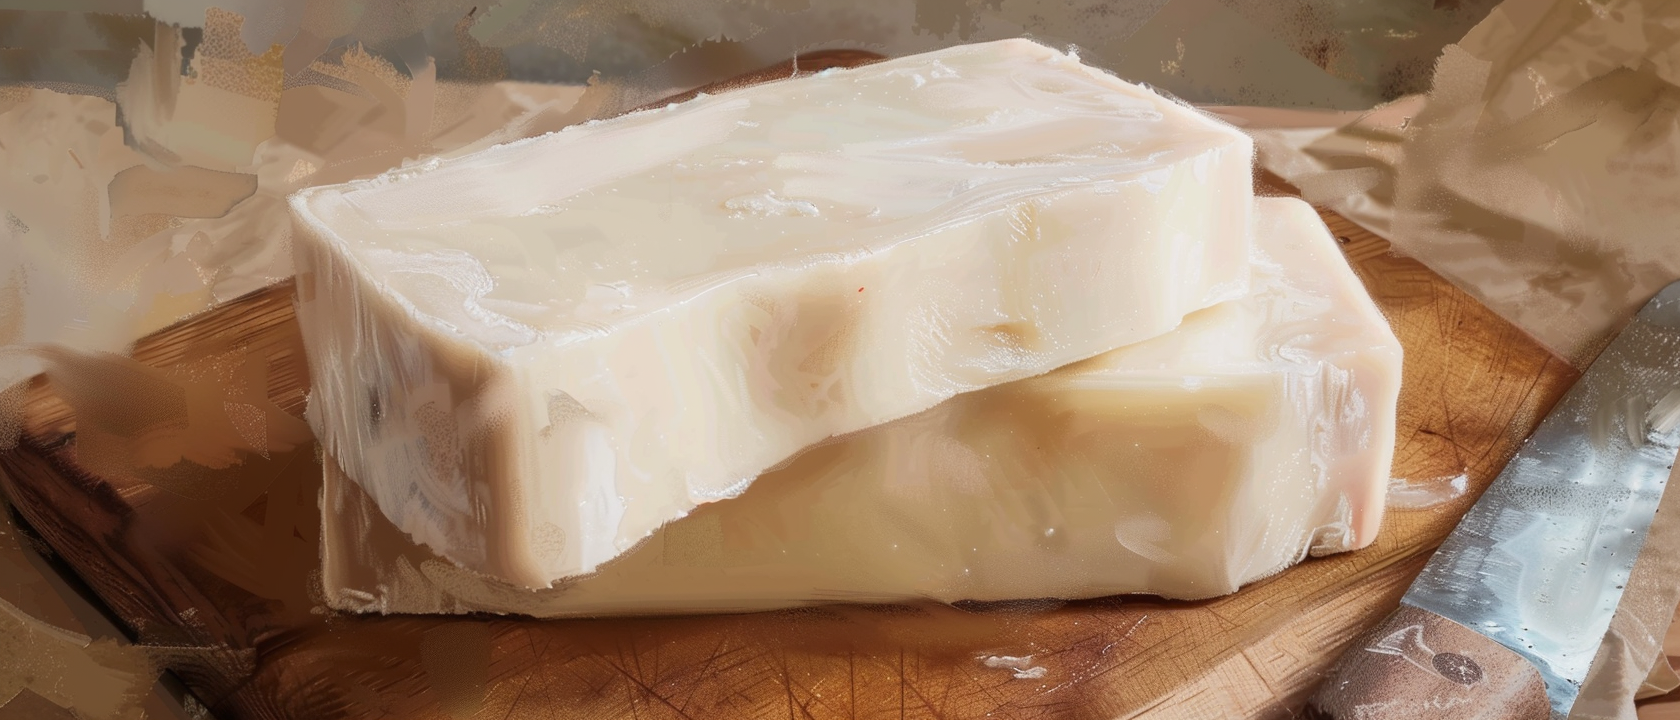 How to Make Beef Tallow At Home: A Step-by-Step Guide